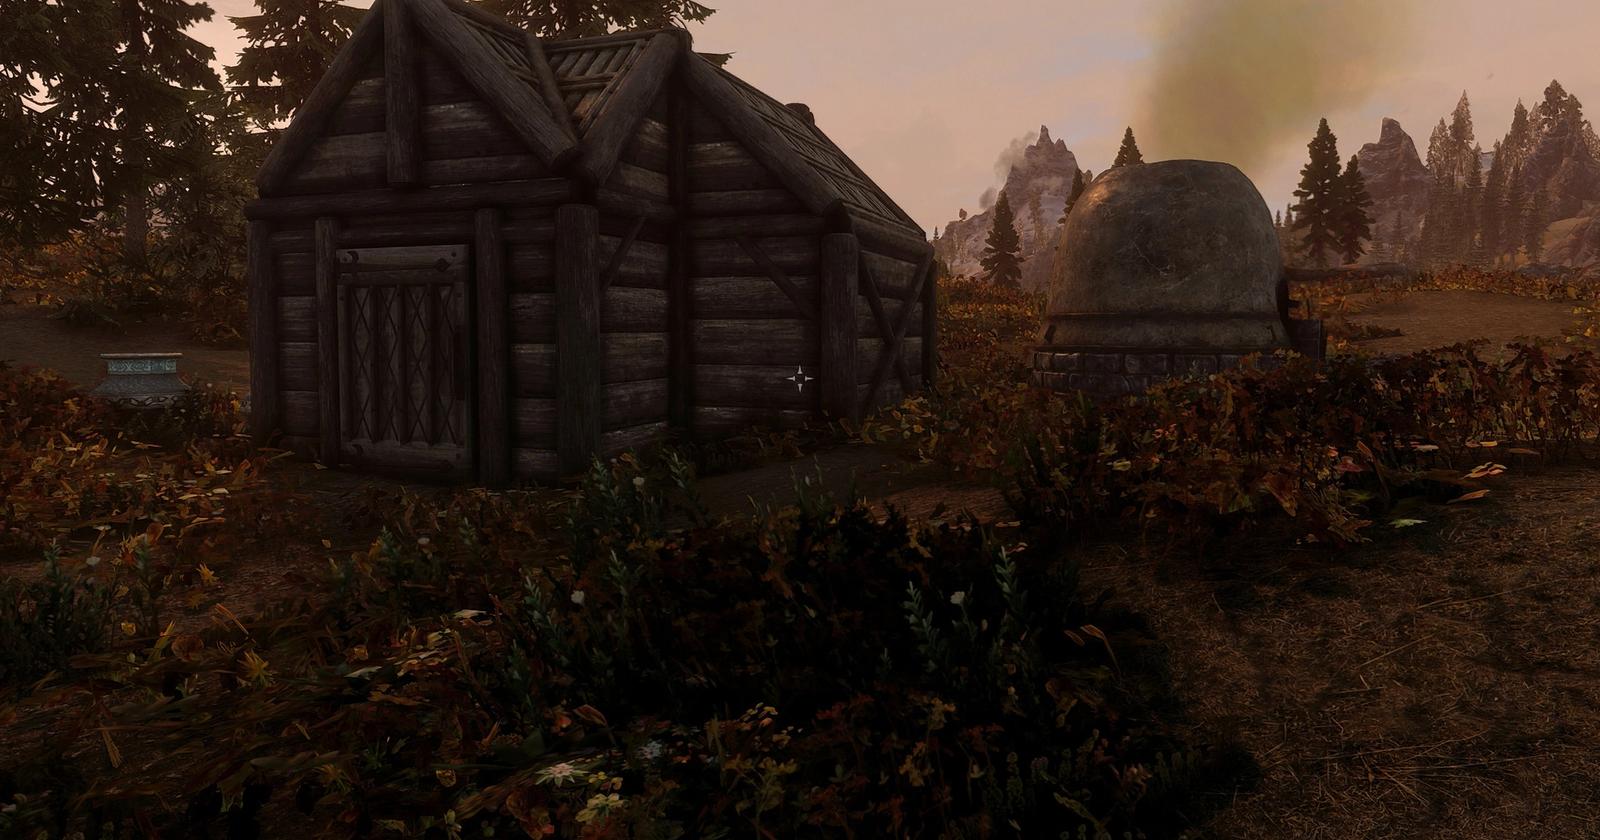 Skyrim Mod Brings Real Estate Agents to Tamriel